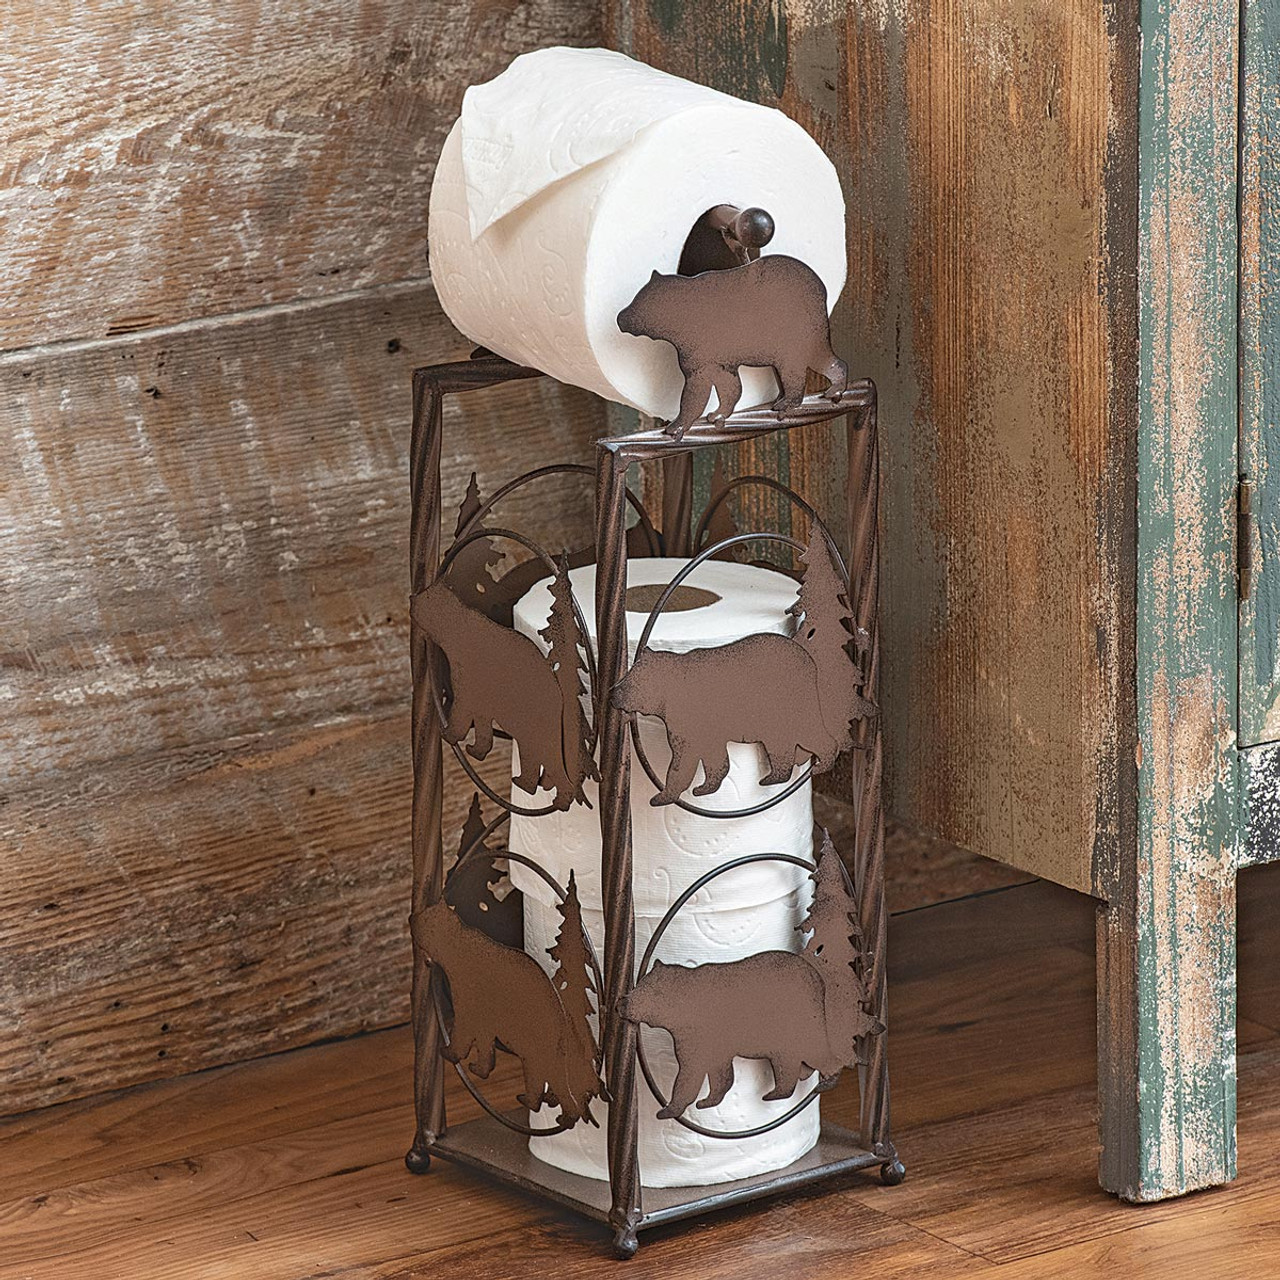 Pine Tree & Bears Toilet Paper Stand, USA Made - Log Cabin Decor, Black Forest Decor DS22419